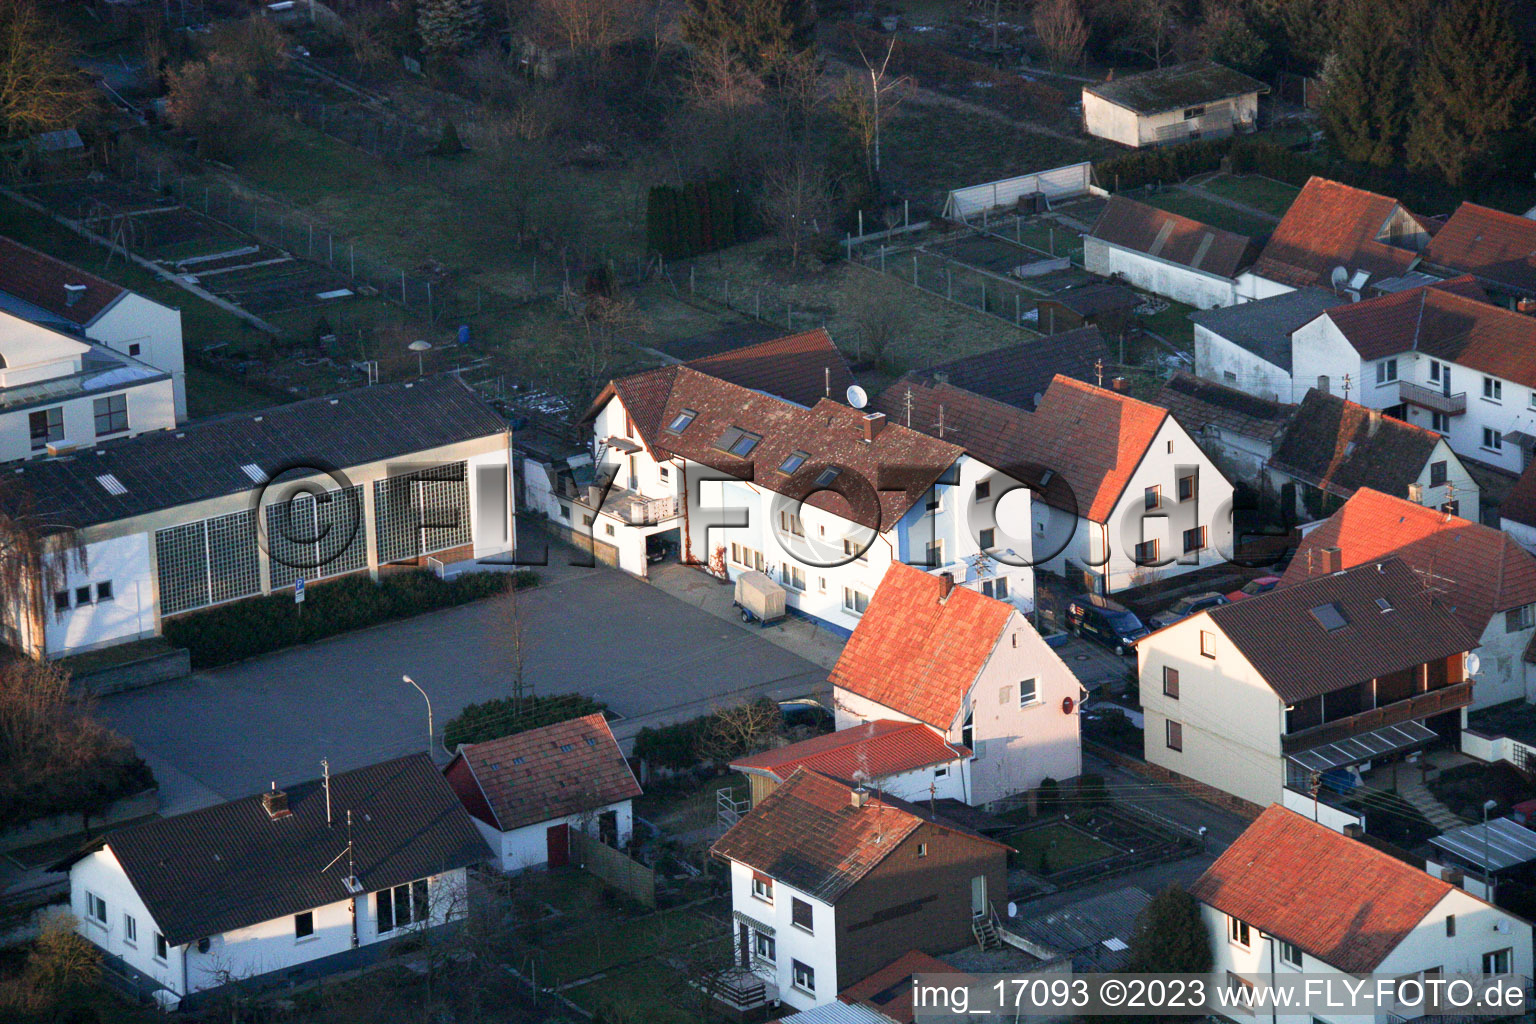 Fire department, sports hall in Minfeld in the state Rhineland-Palatinate, Germany from the plane